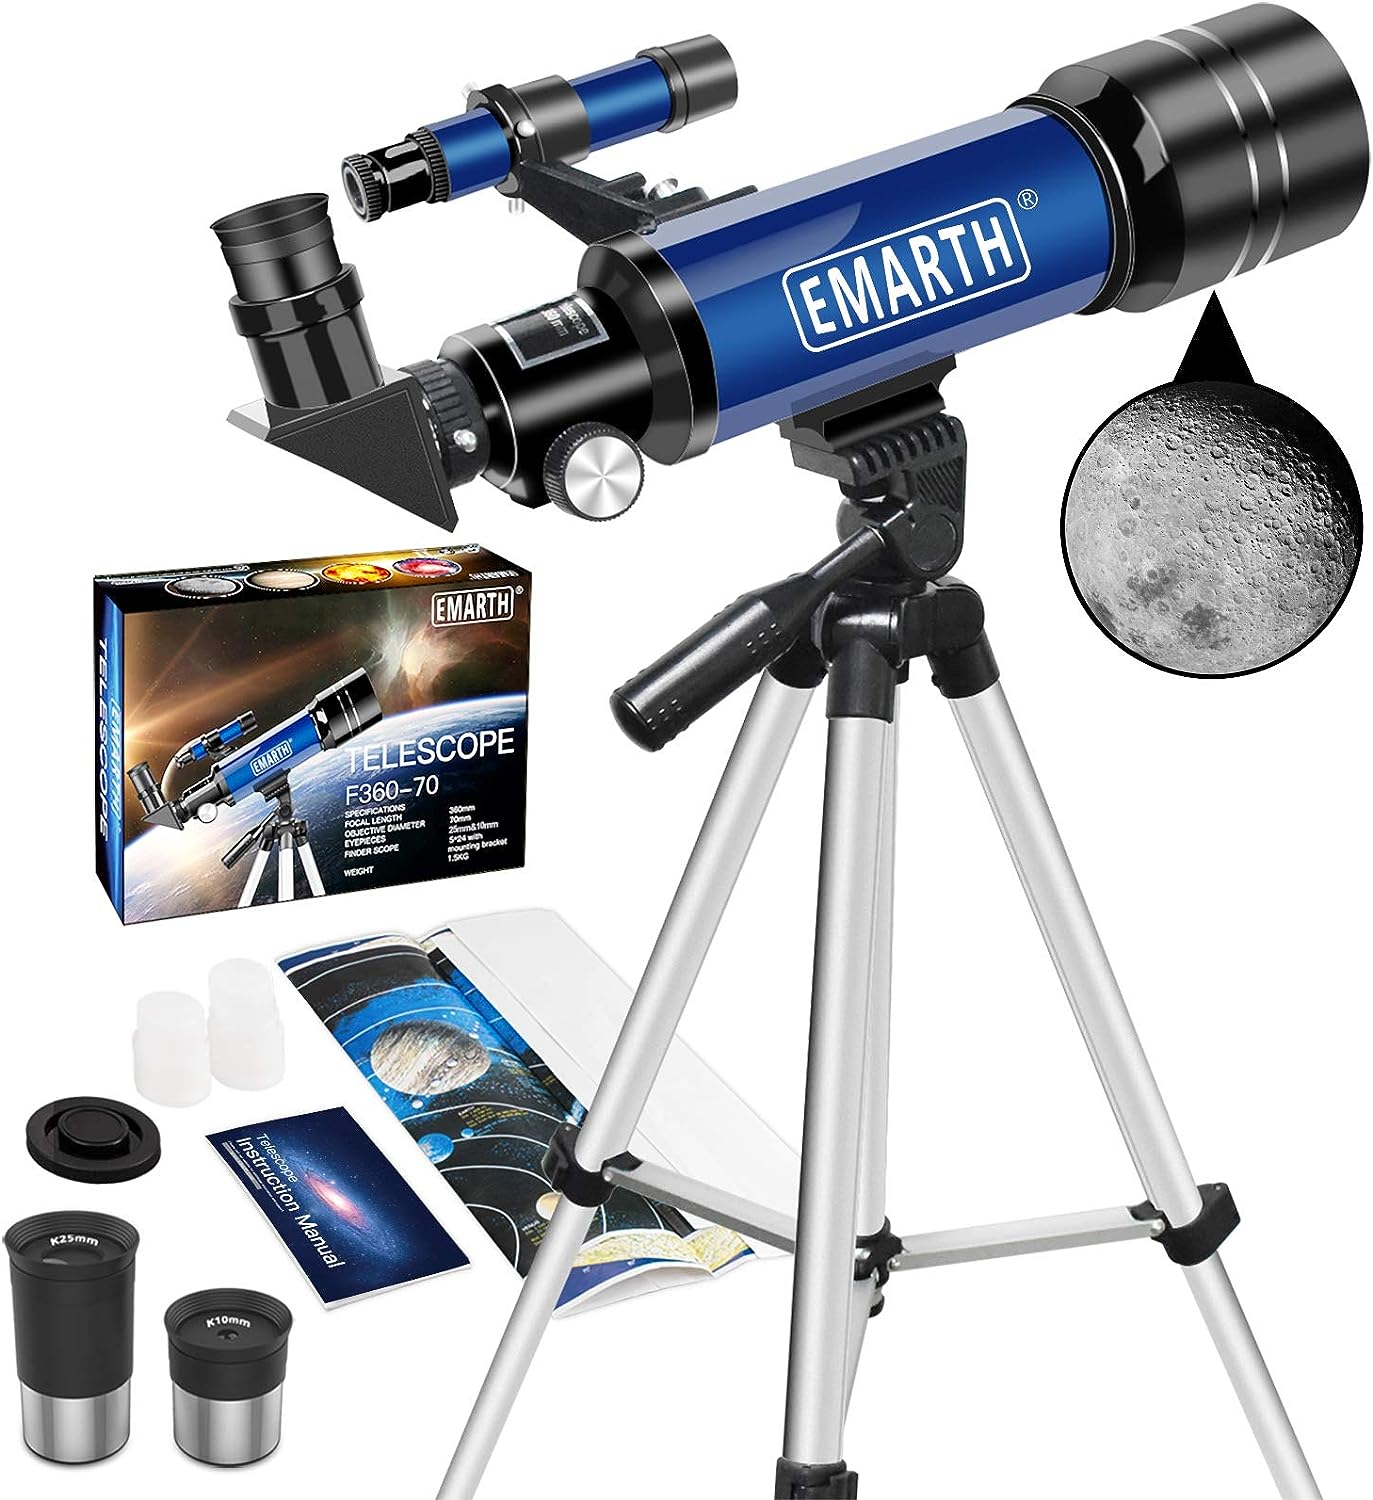 Telescope, 70MM Aperture Kids Telescope with 2 Eyepieces, 360MM Refractor Portable Telescope for Kids with Tripod & Finder Scope, STEM Toys Astronomy Gifts for Children